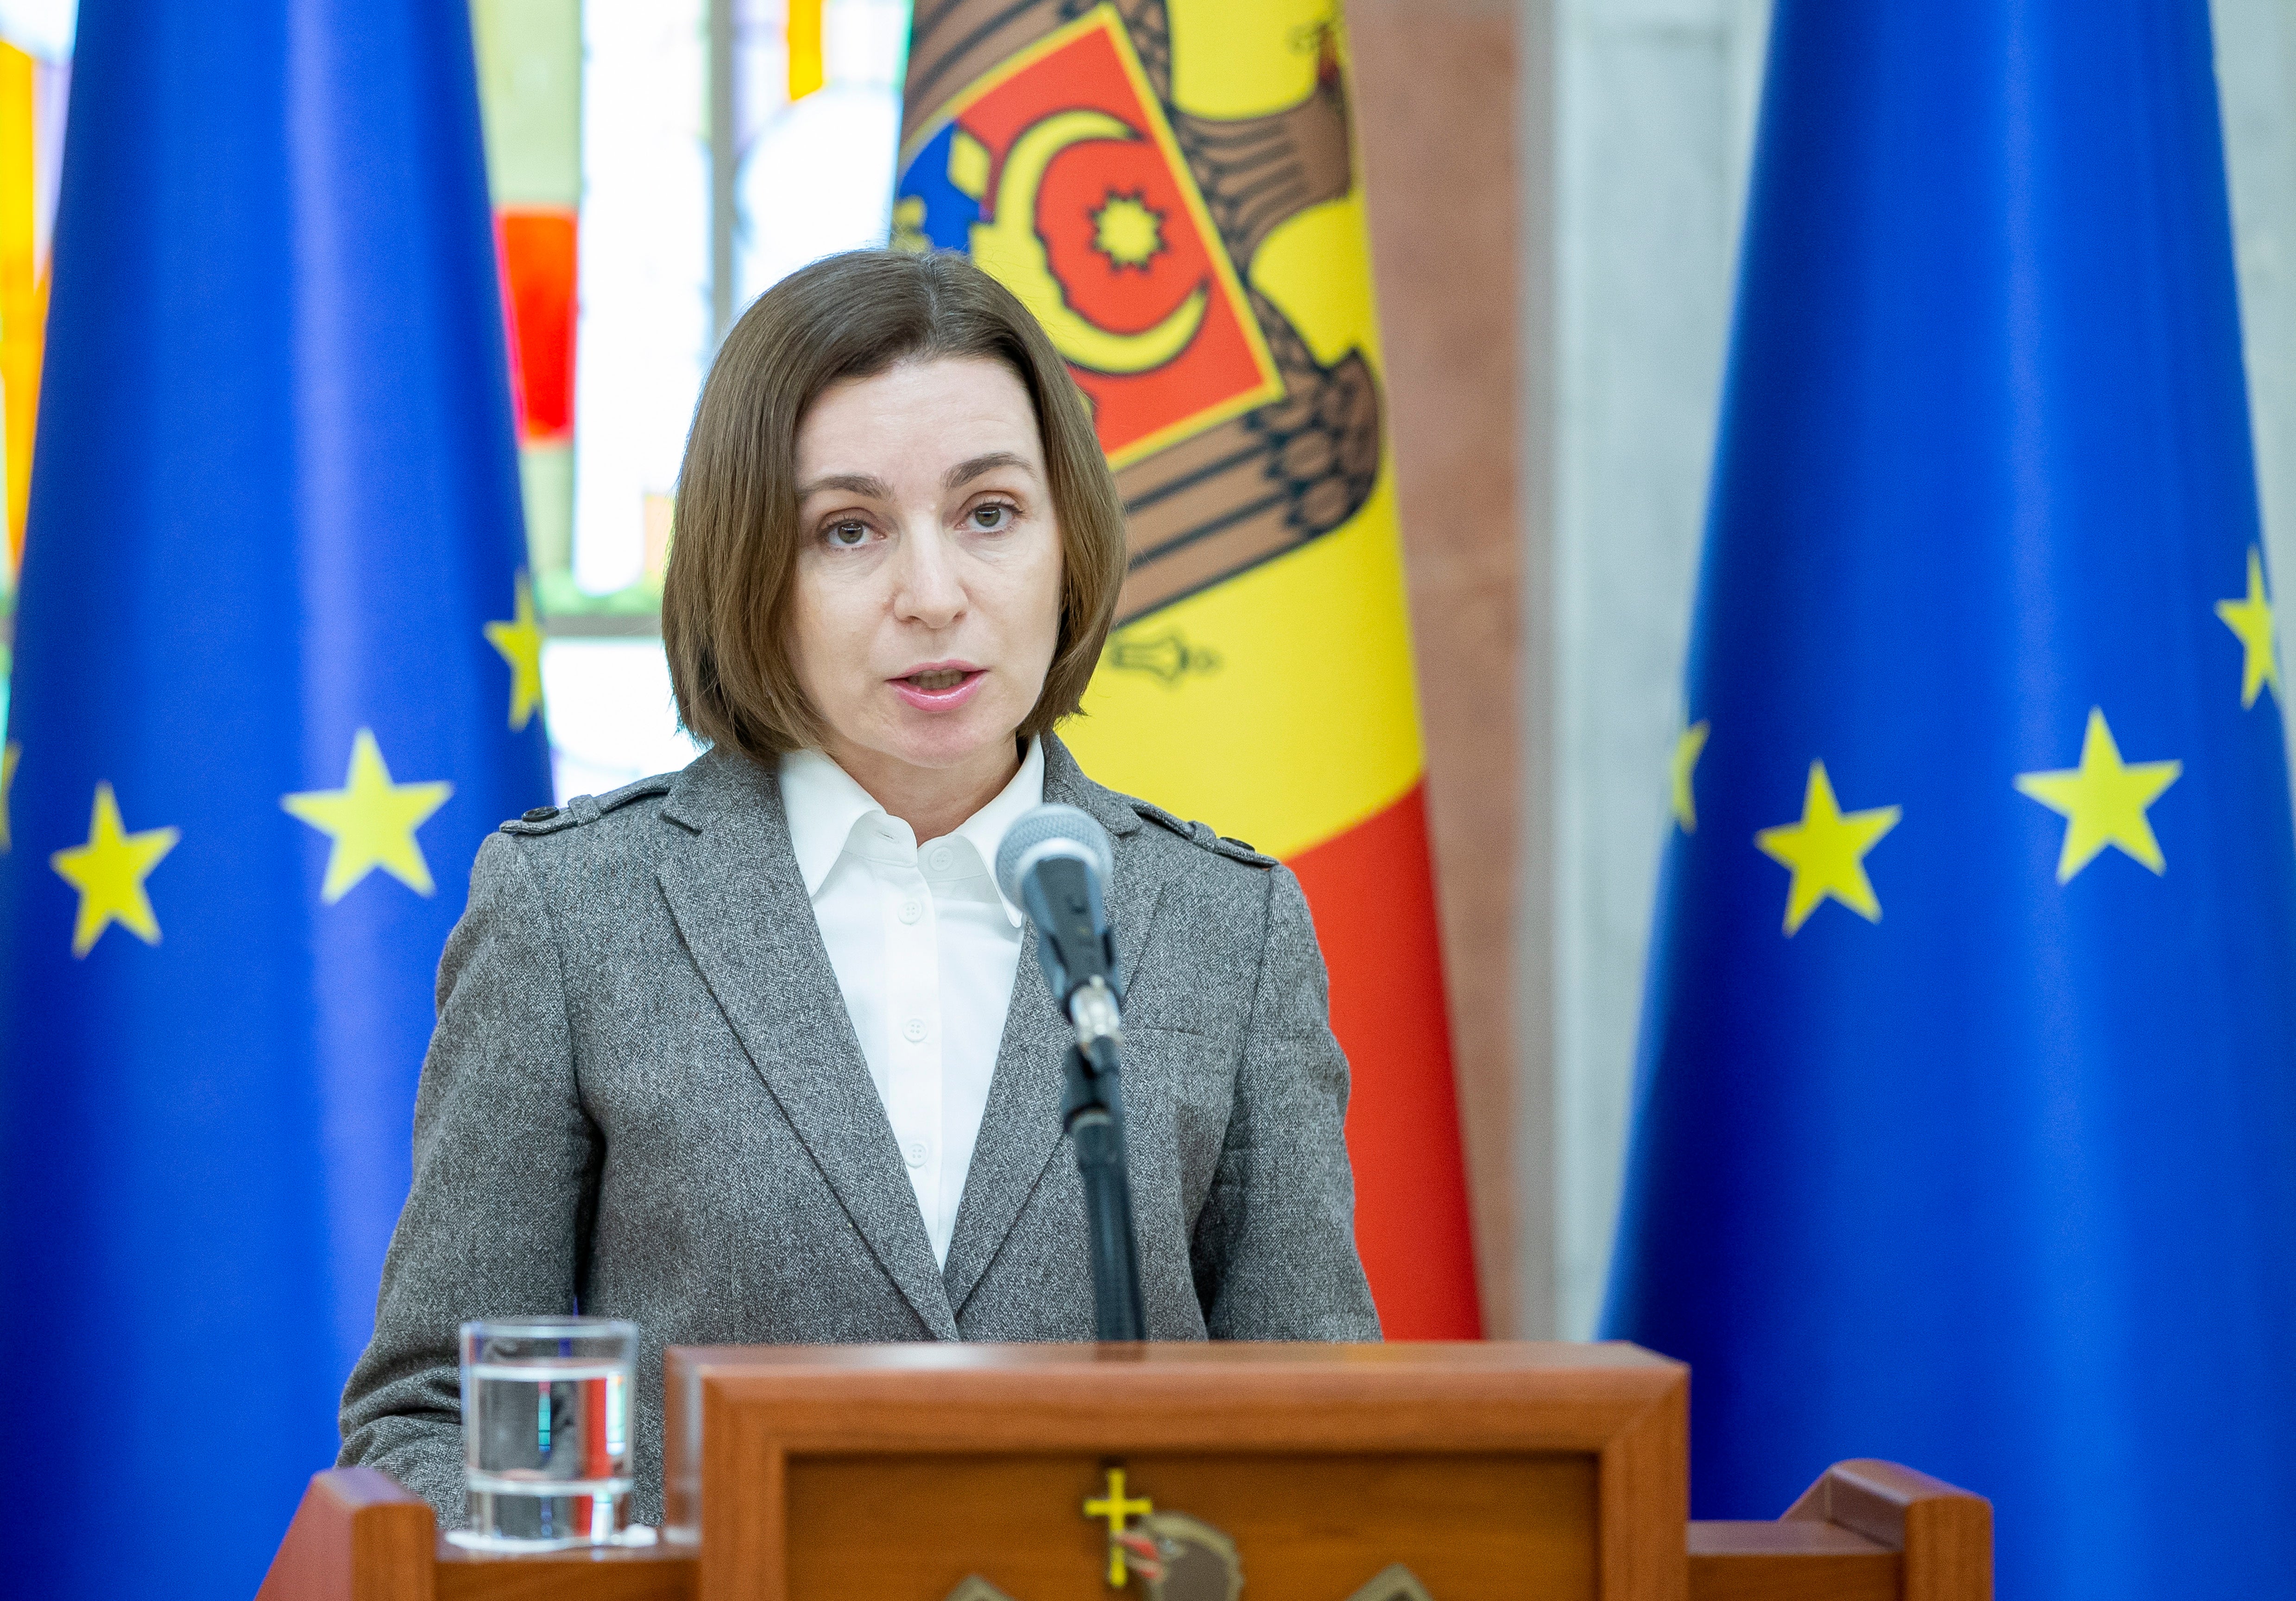 The president of Moldova, Maia Sandu, speaks during a briefing at the presidential palace in Chisinau